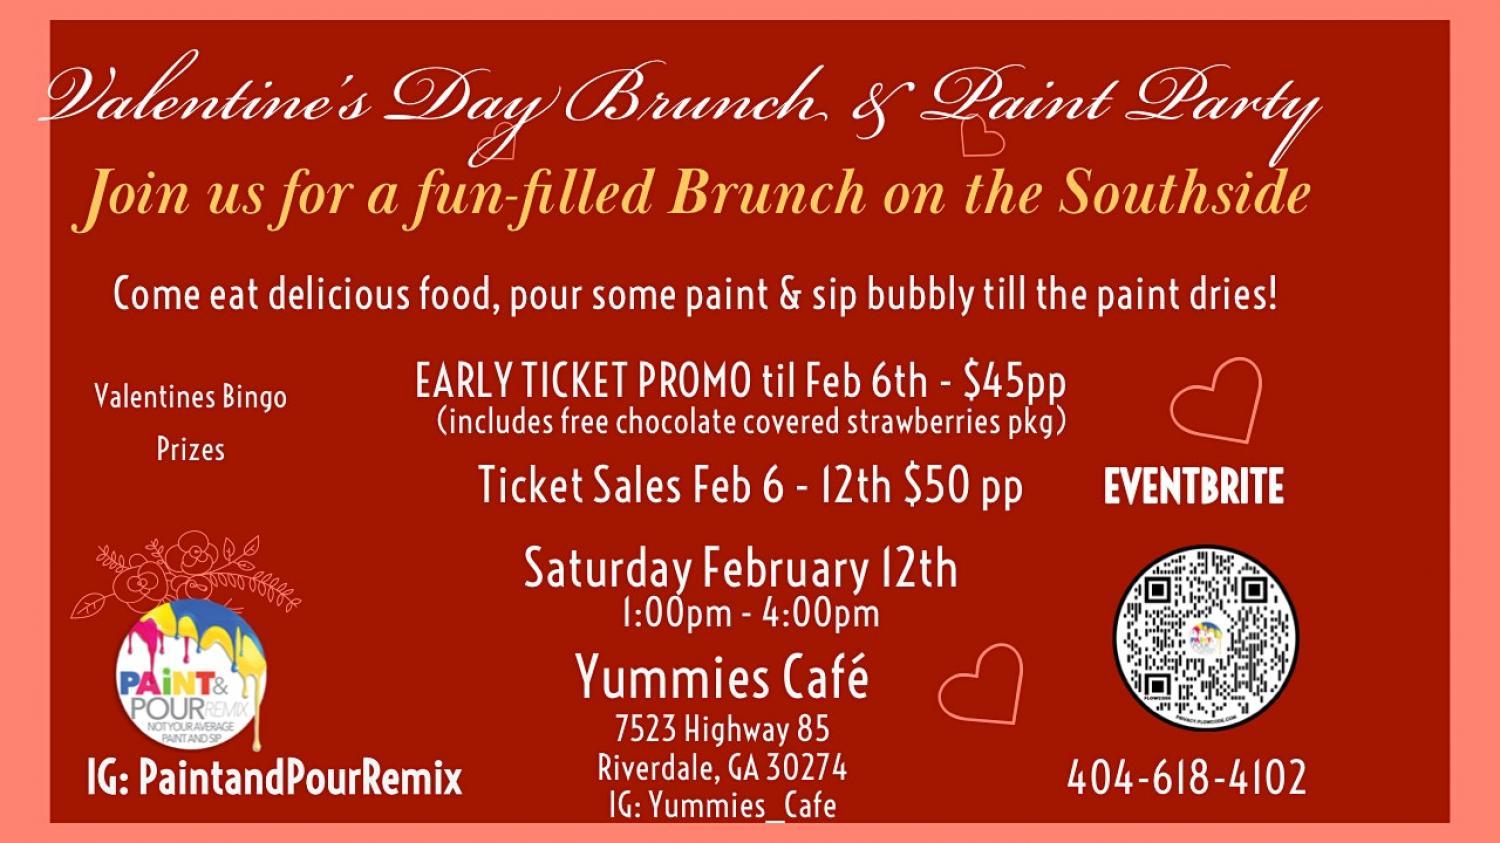 Valentines Day Brunch & Paint Party